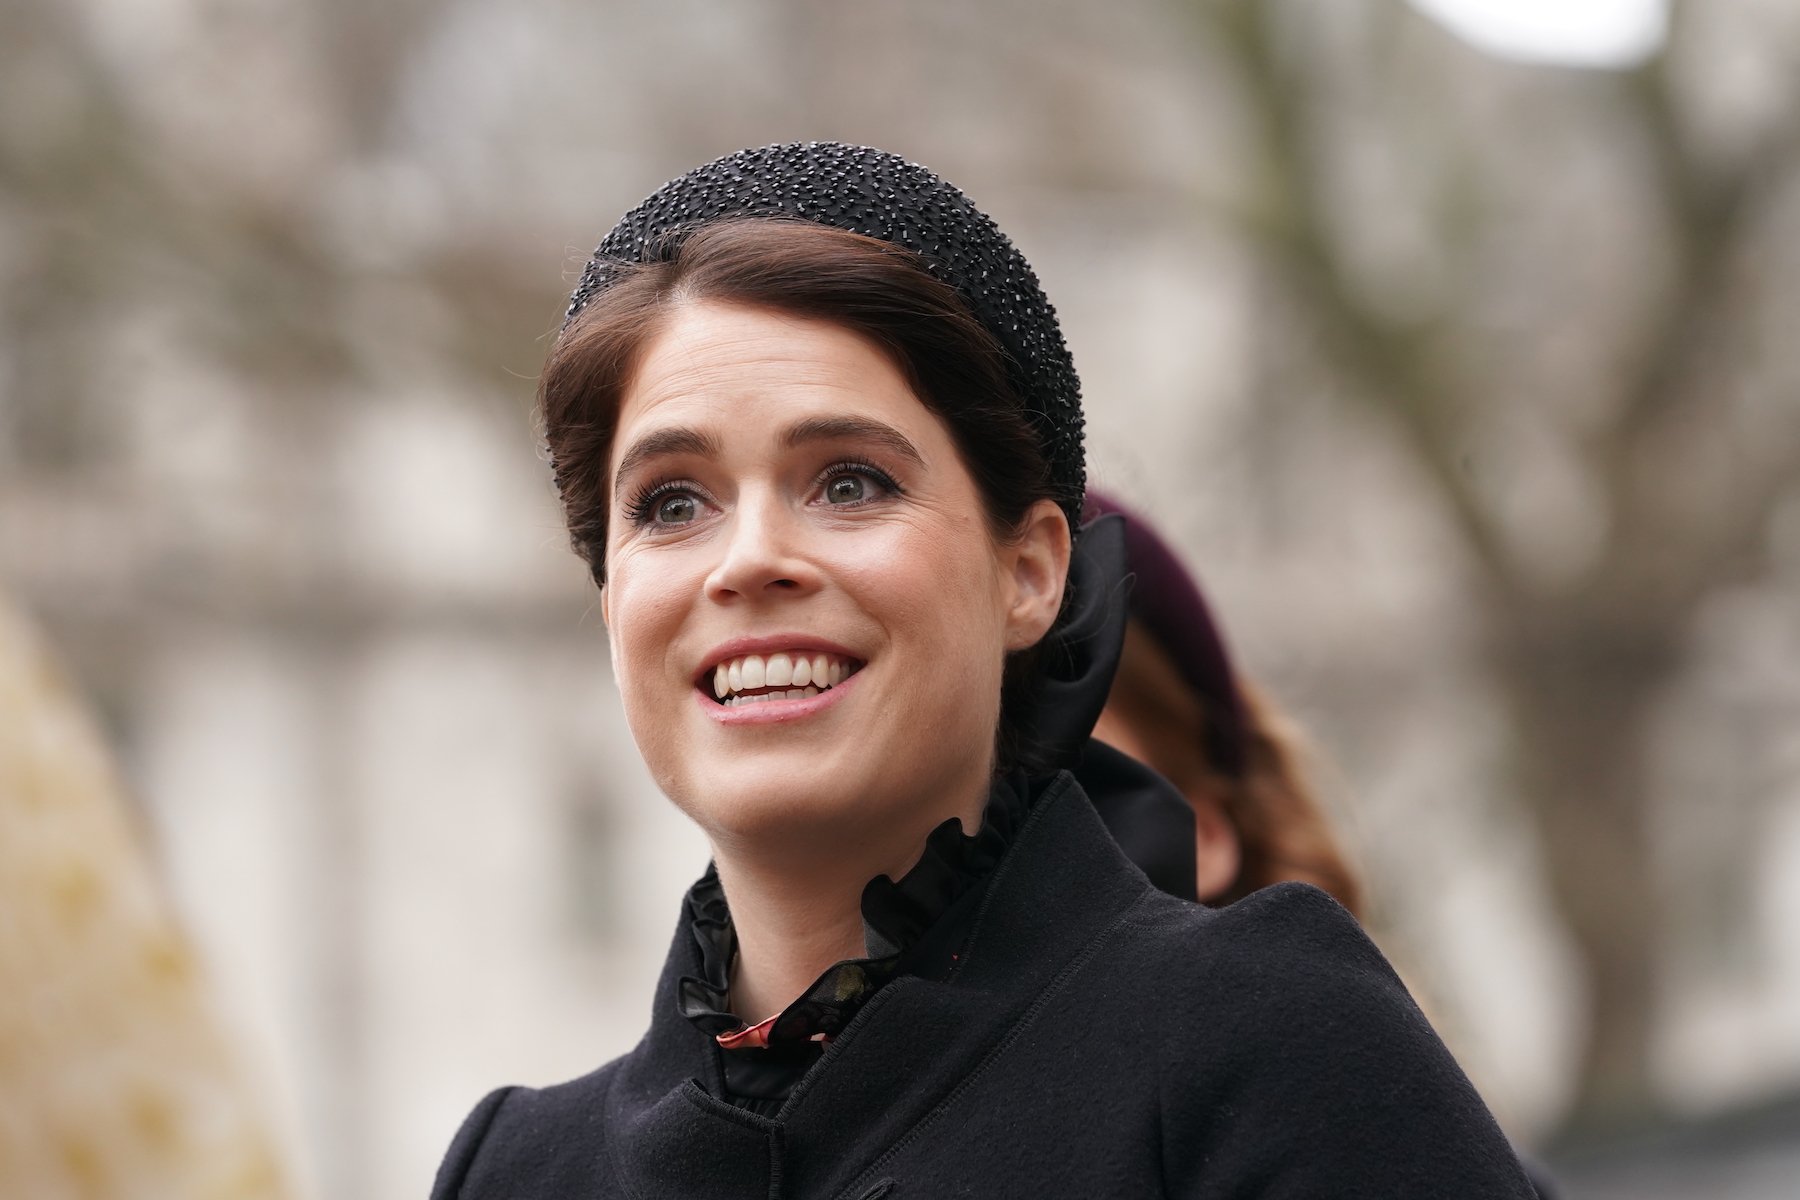 What Is Princess Eugenie’s Age in 2023?